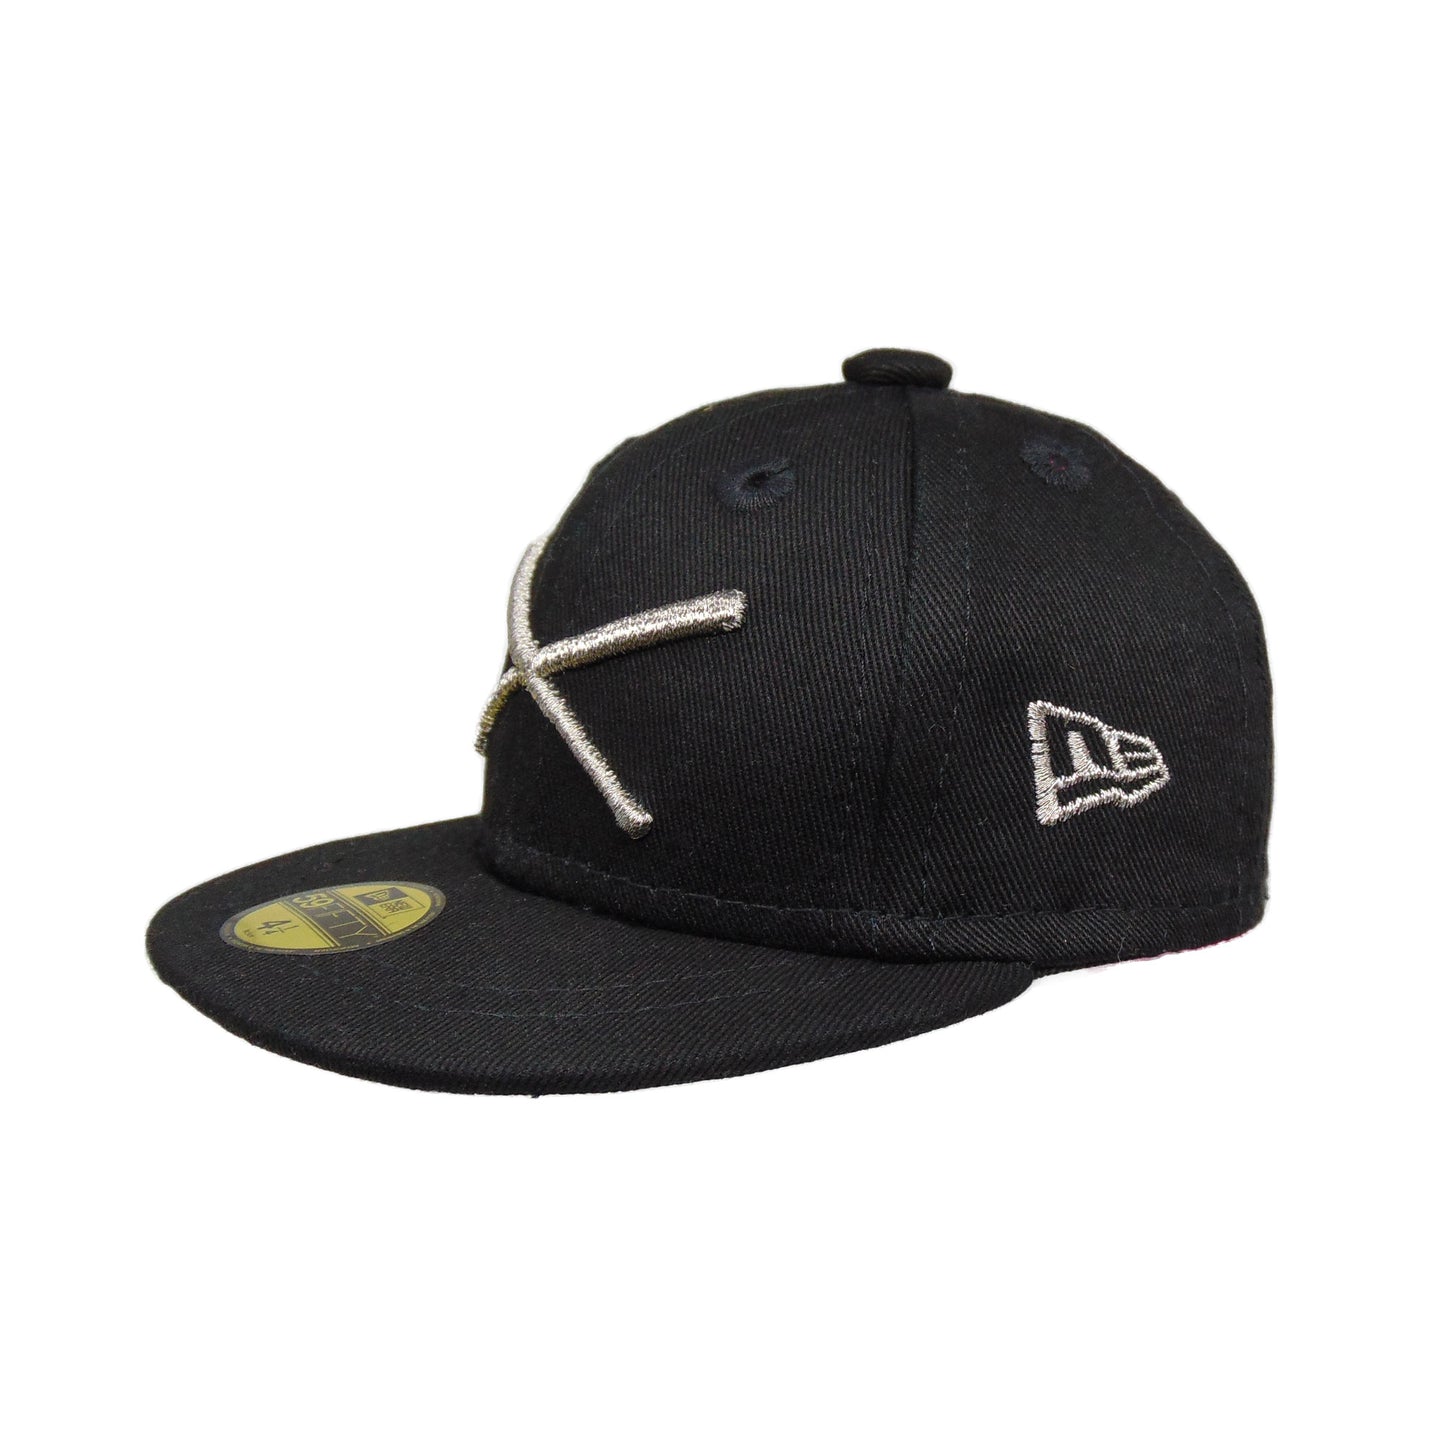 JustFitteds Crossed Bats MINI New Era 59FIFTY Cap Heavy Hitters